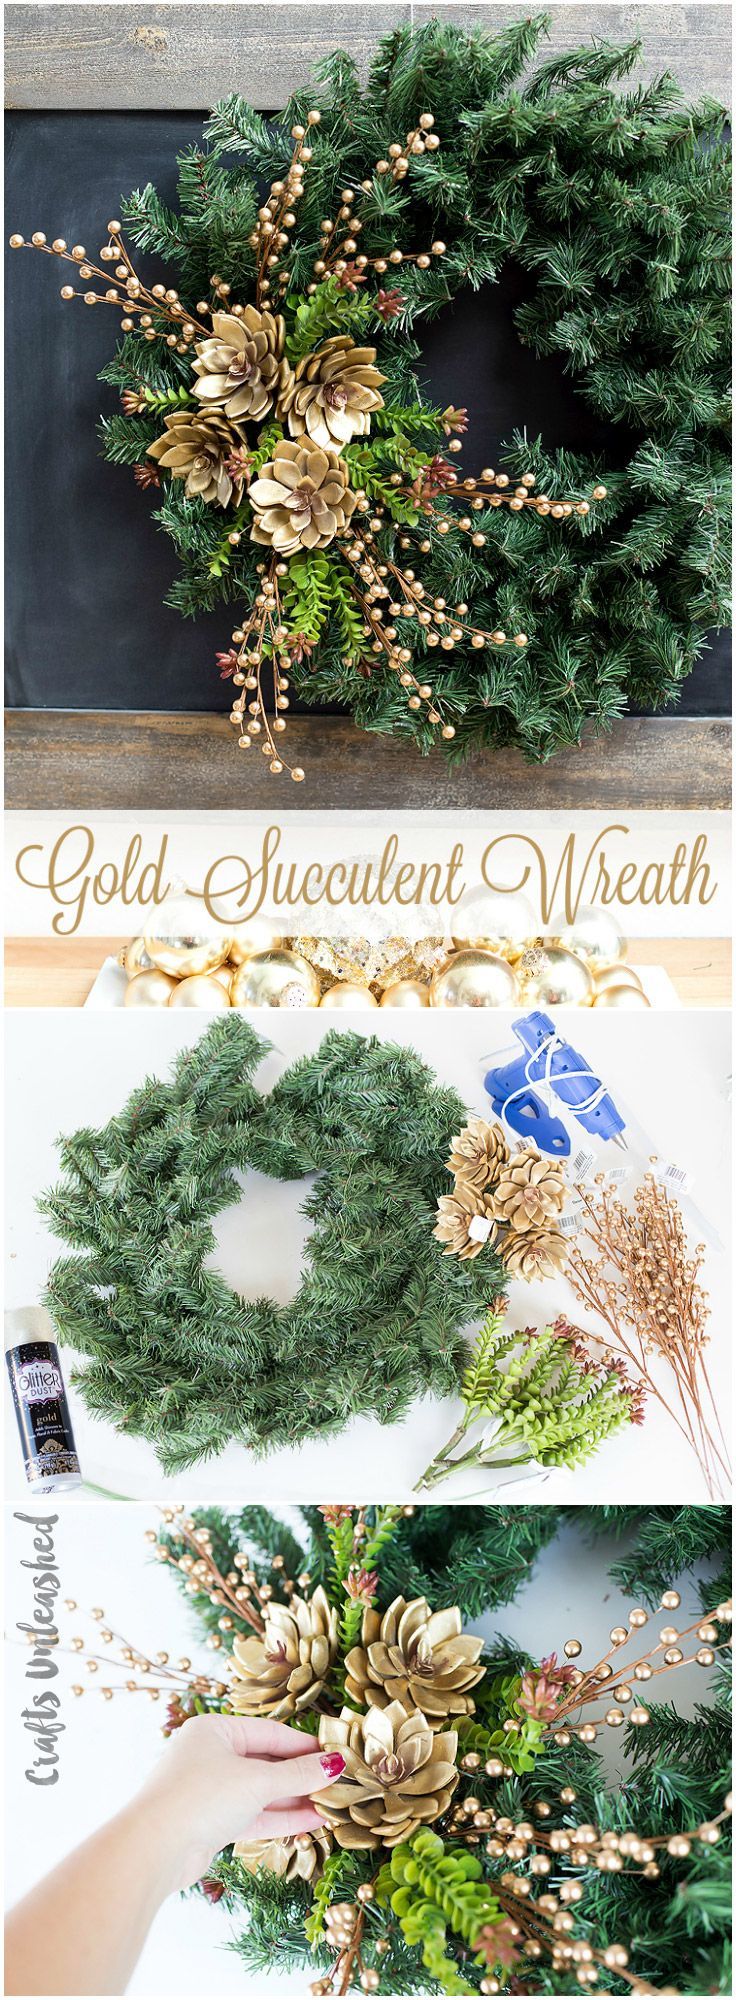 DIY Holiday Wreath With Gold Succulents - Consumer Crafts -   17 holiday Wreaths gold ideas